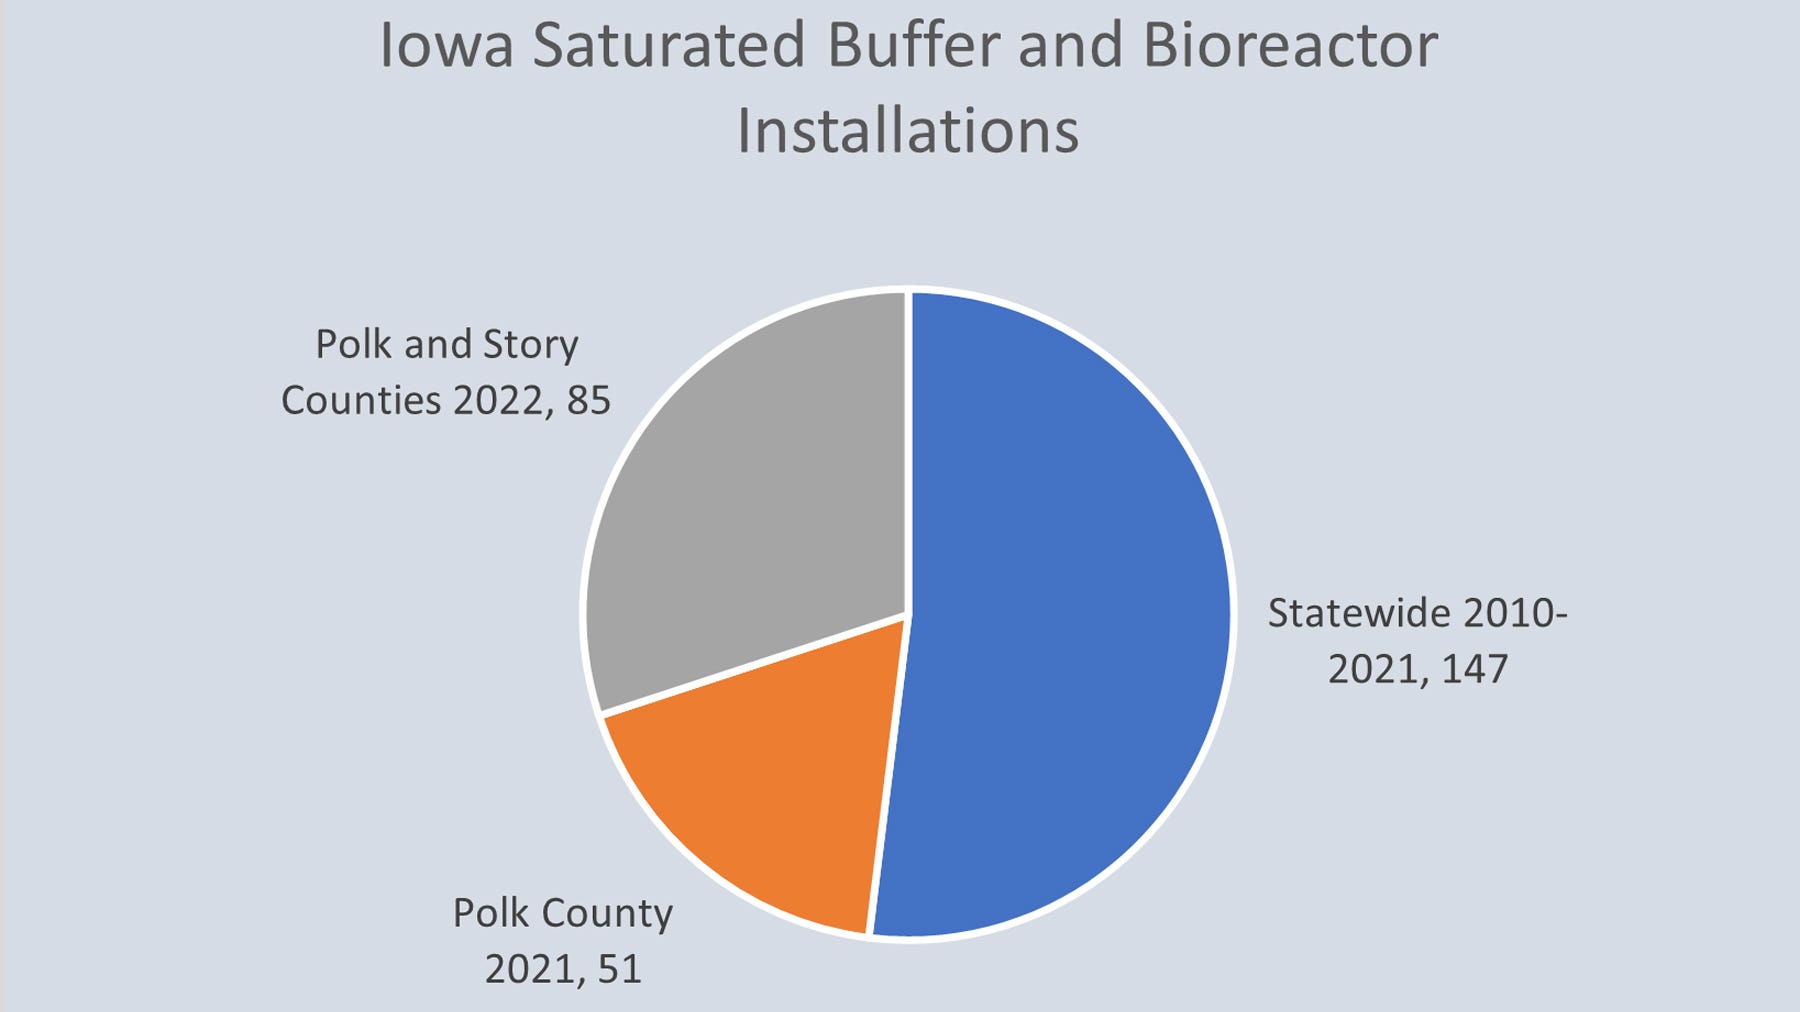 pie chart of saturated buffer, bioreactor installations